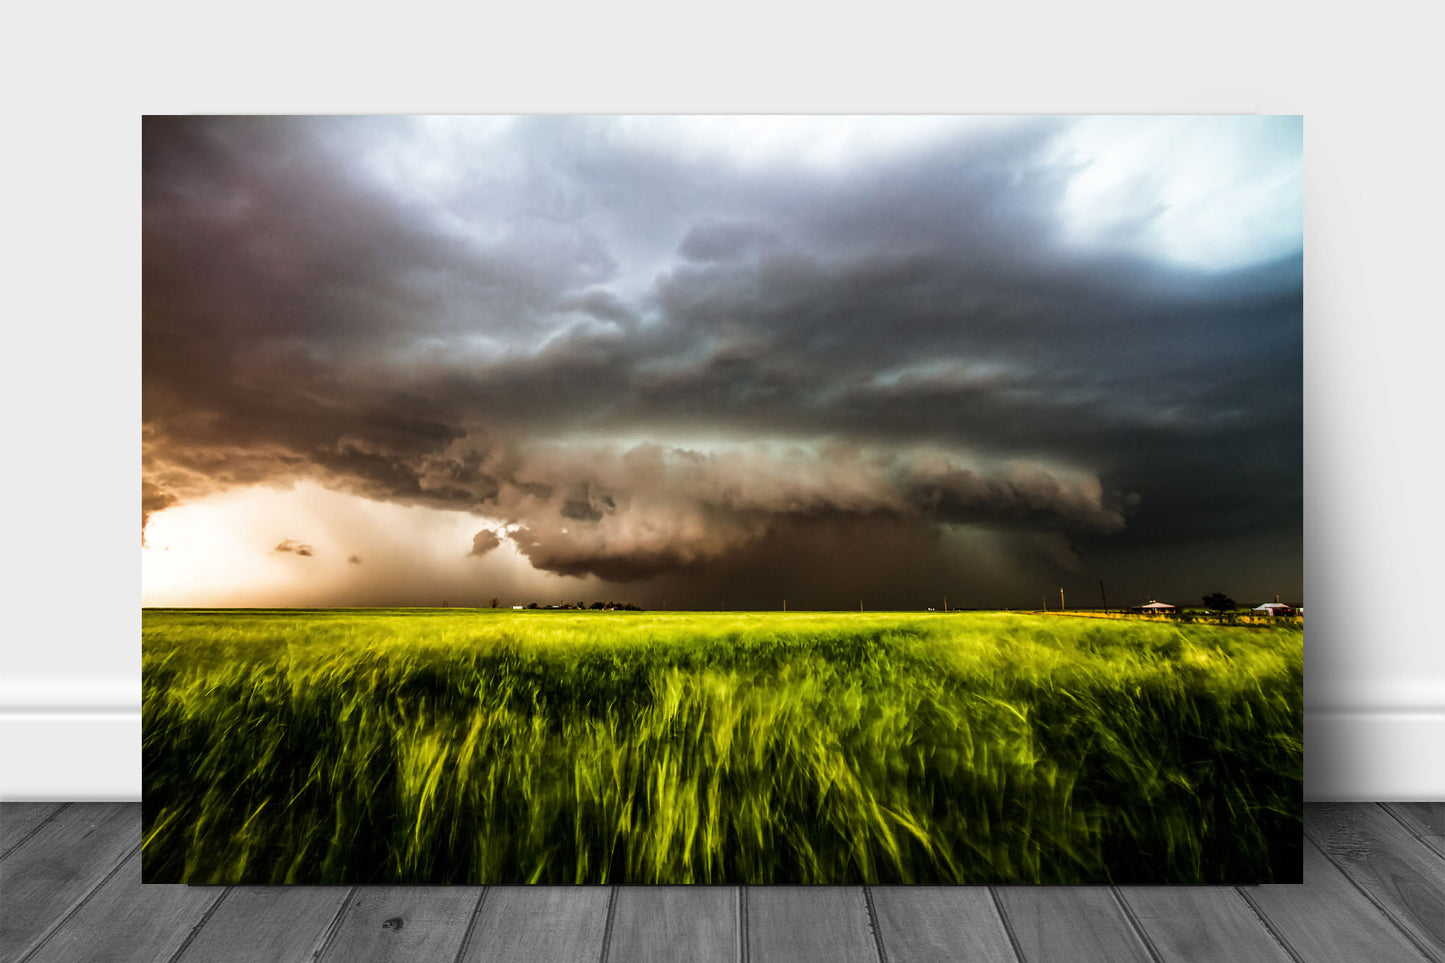 Storm metal print on aluminum of a supercell thunderstorm with inflow winds pulling wheat in a field toward it on a stormy spring day in Oklahoma.